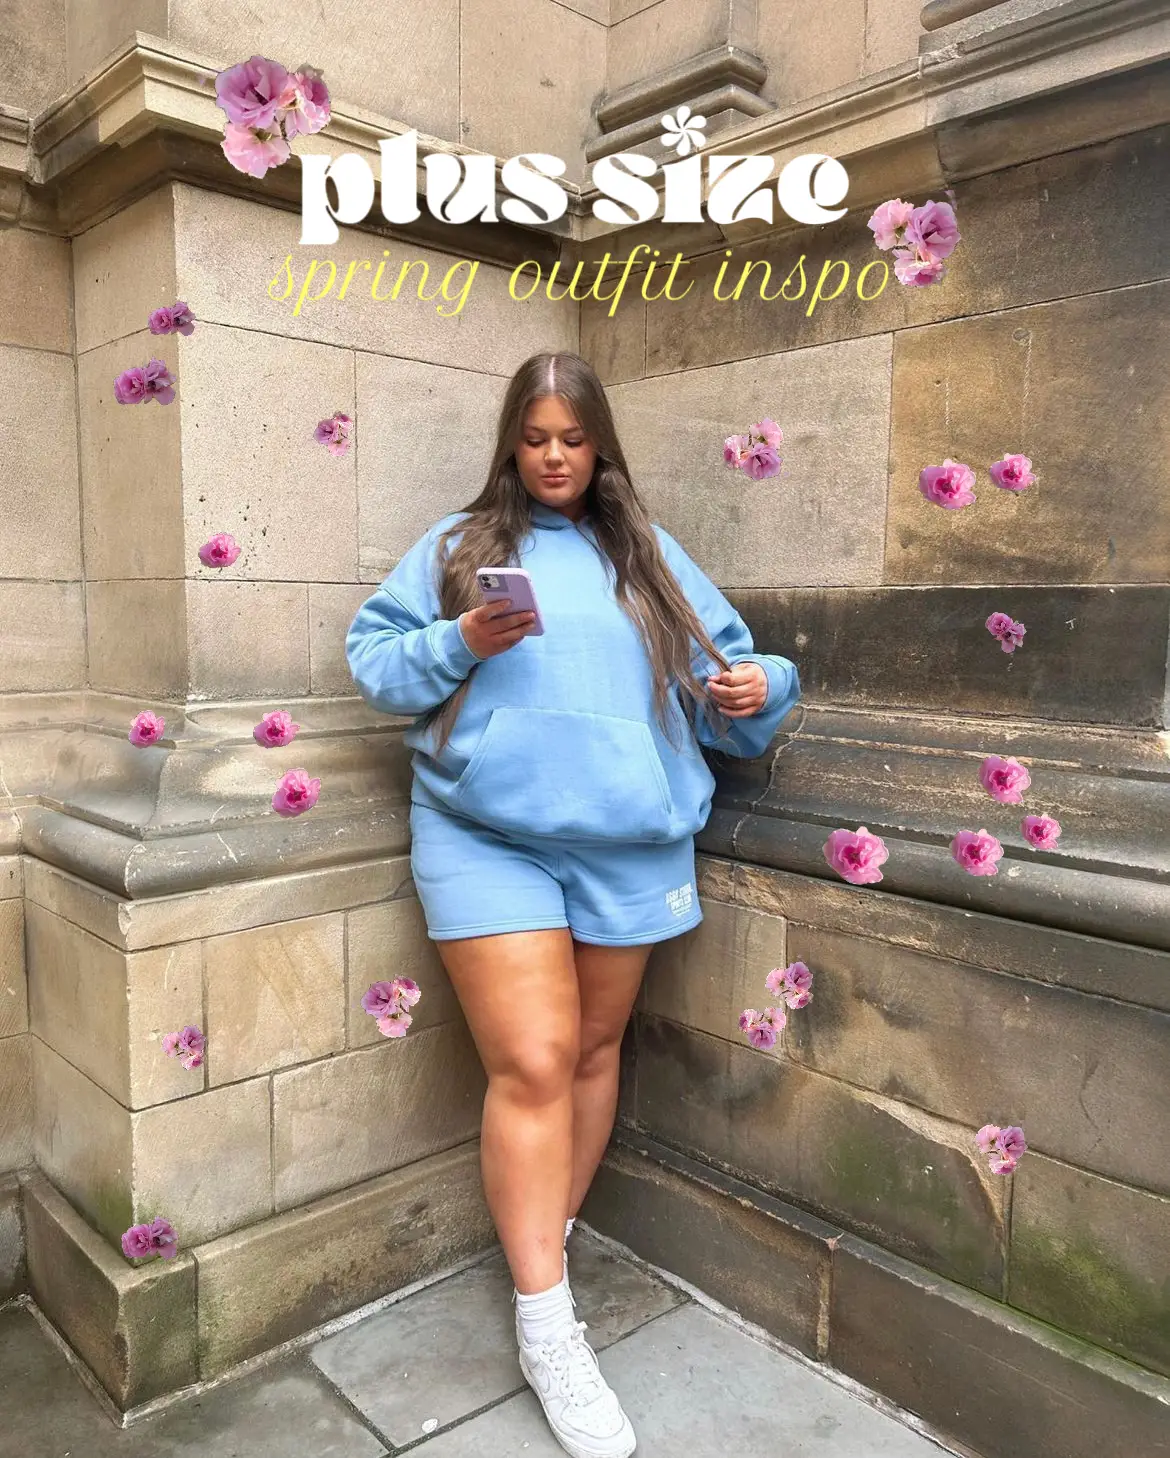 SPRING OUTFIT INSPO: curvy girl edition x, Gallery posted by  Eve_alessandra